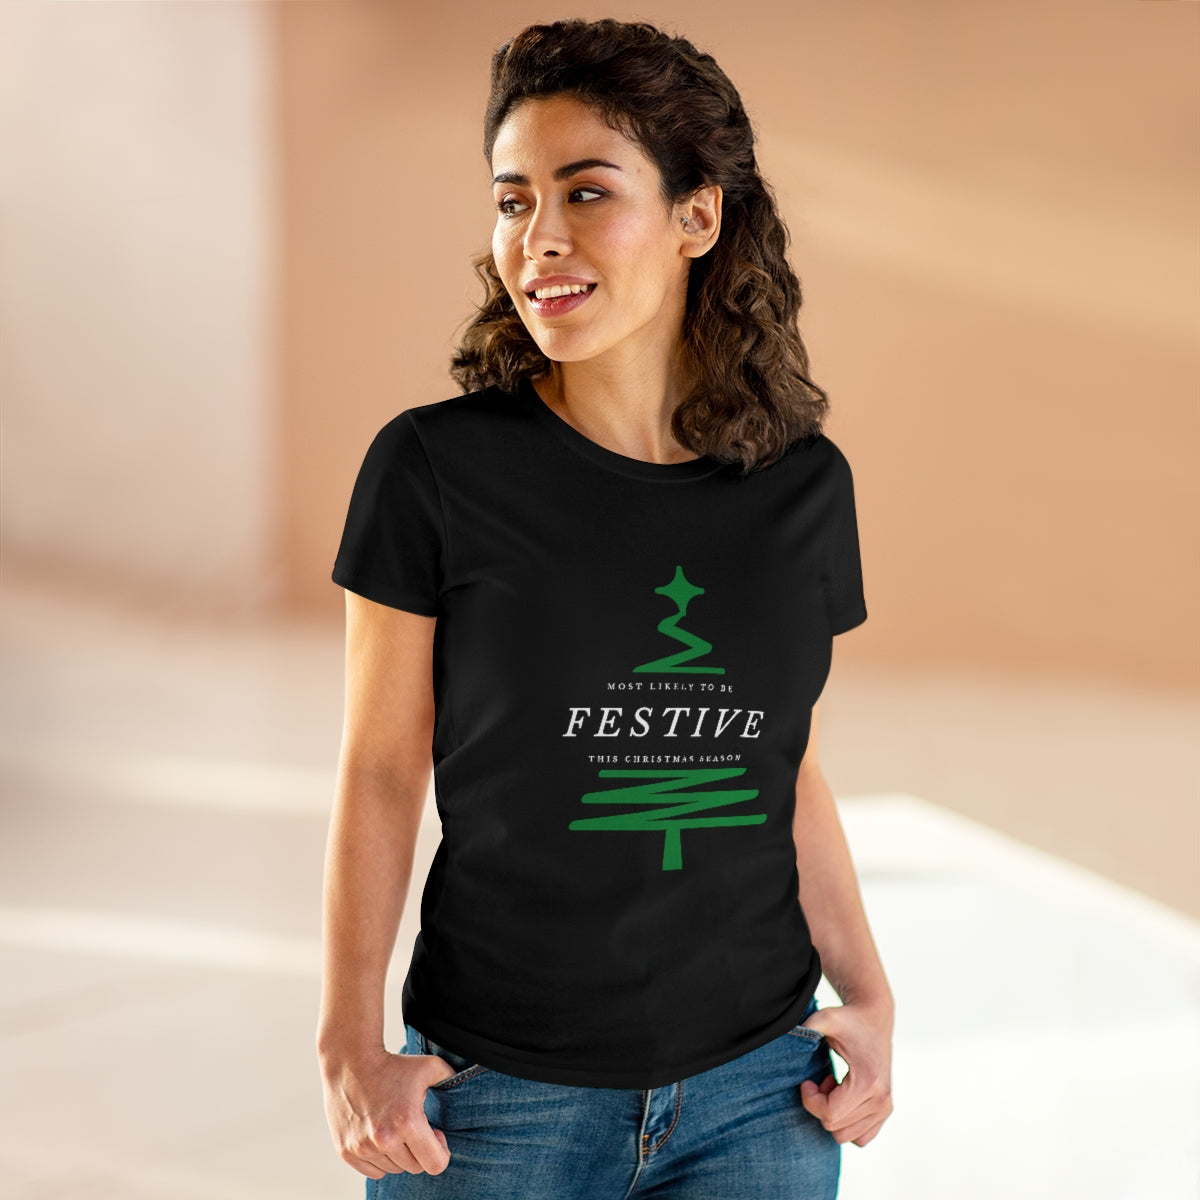 Most Likely to Be Festive - Christmas Tee